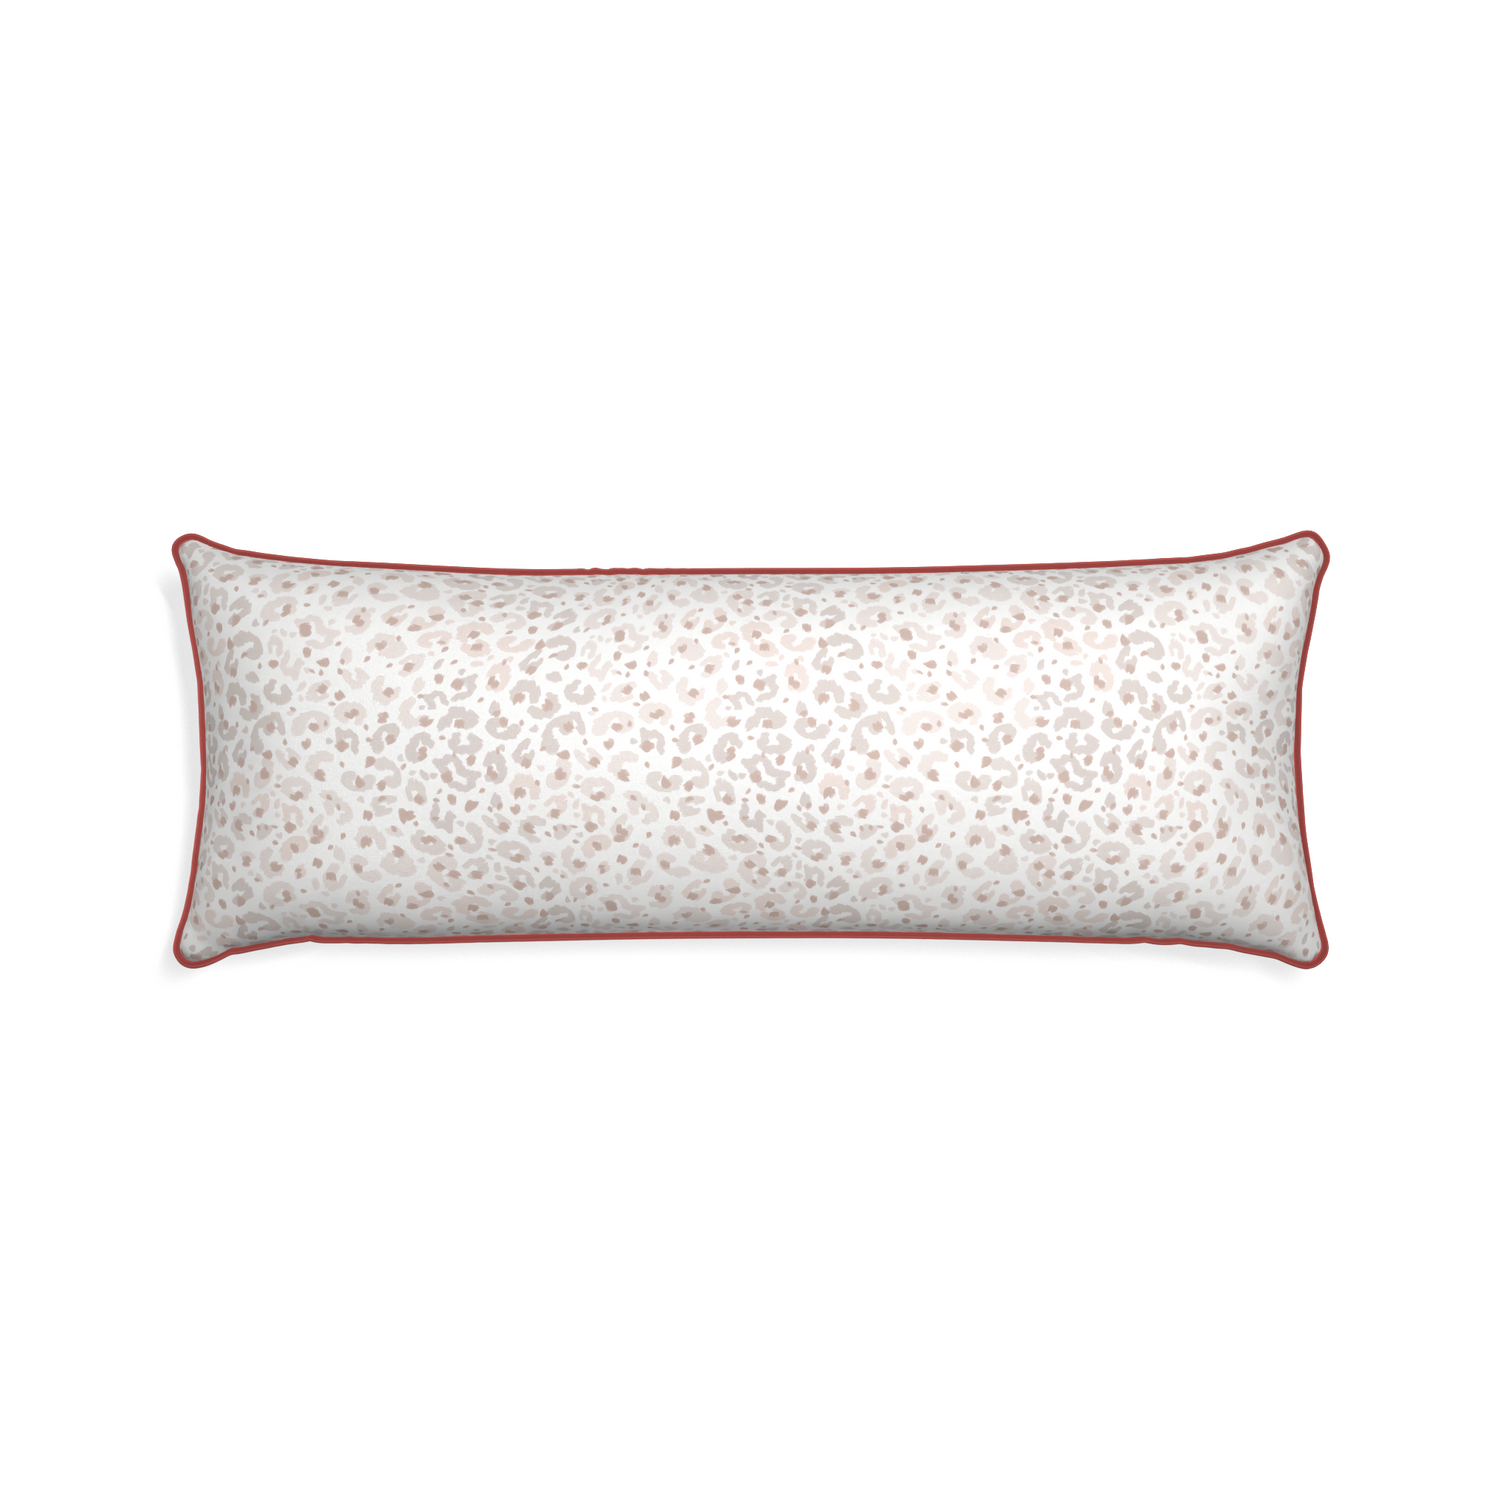 Xl-lumbar rosie custom pillow with c piping on white background